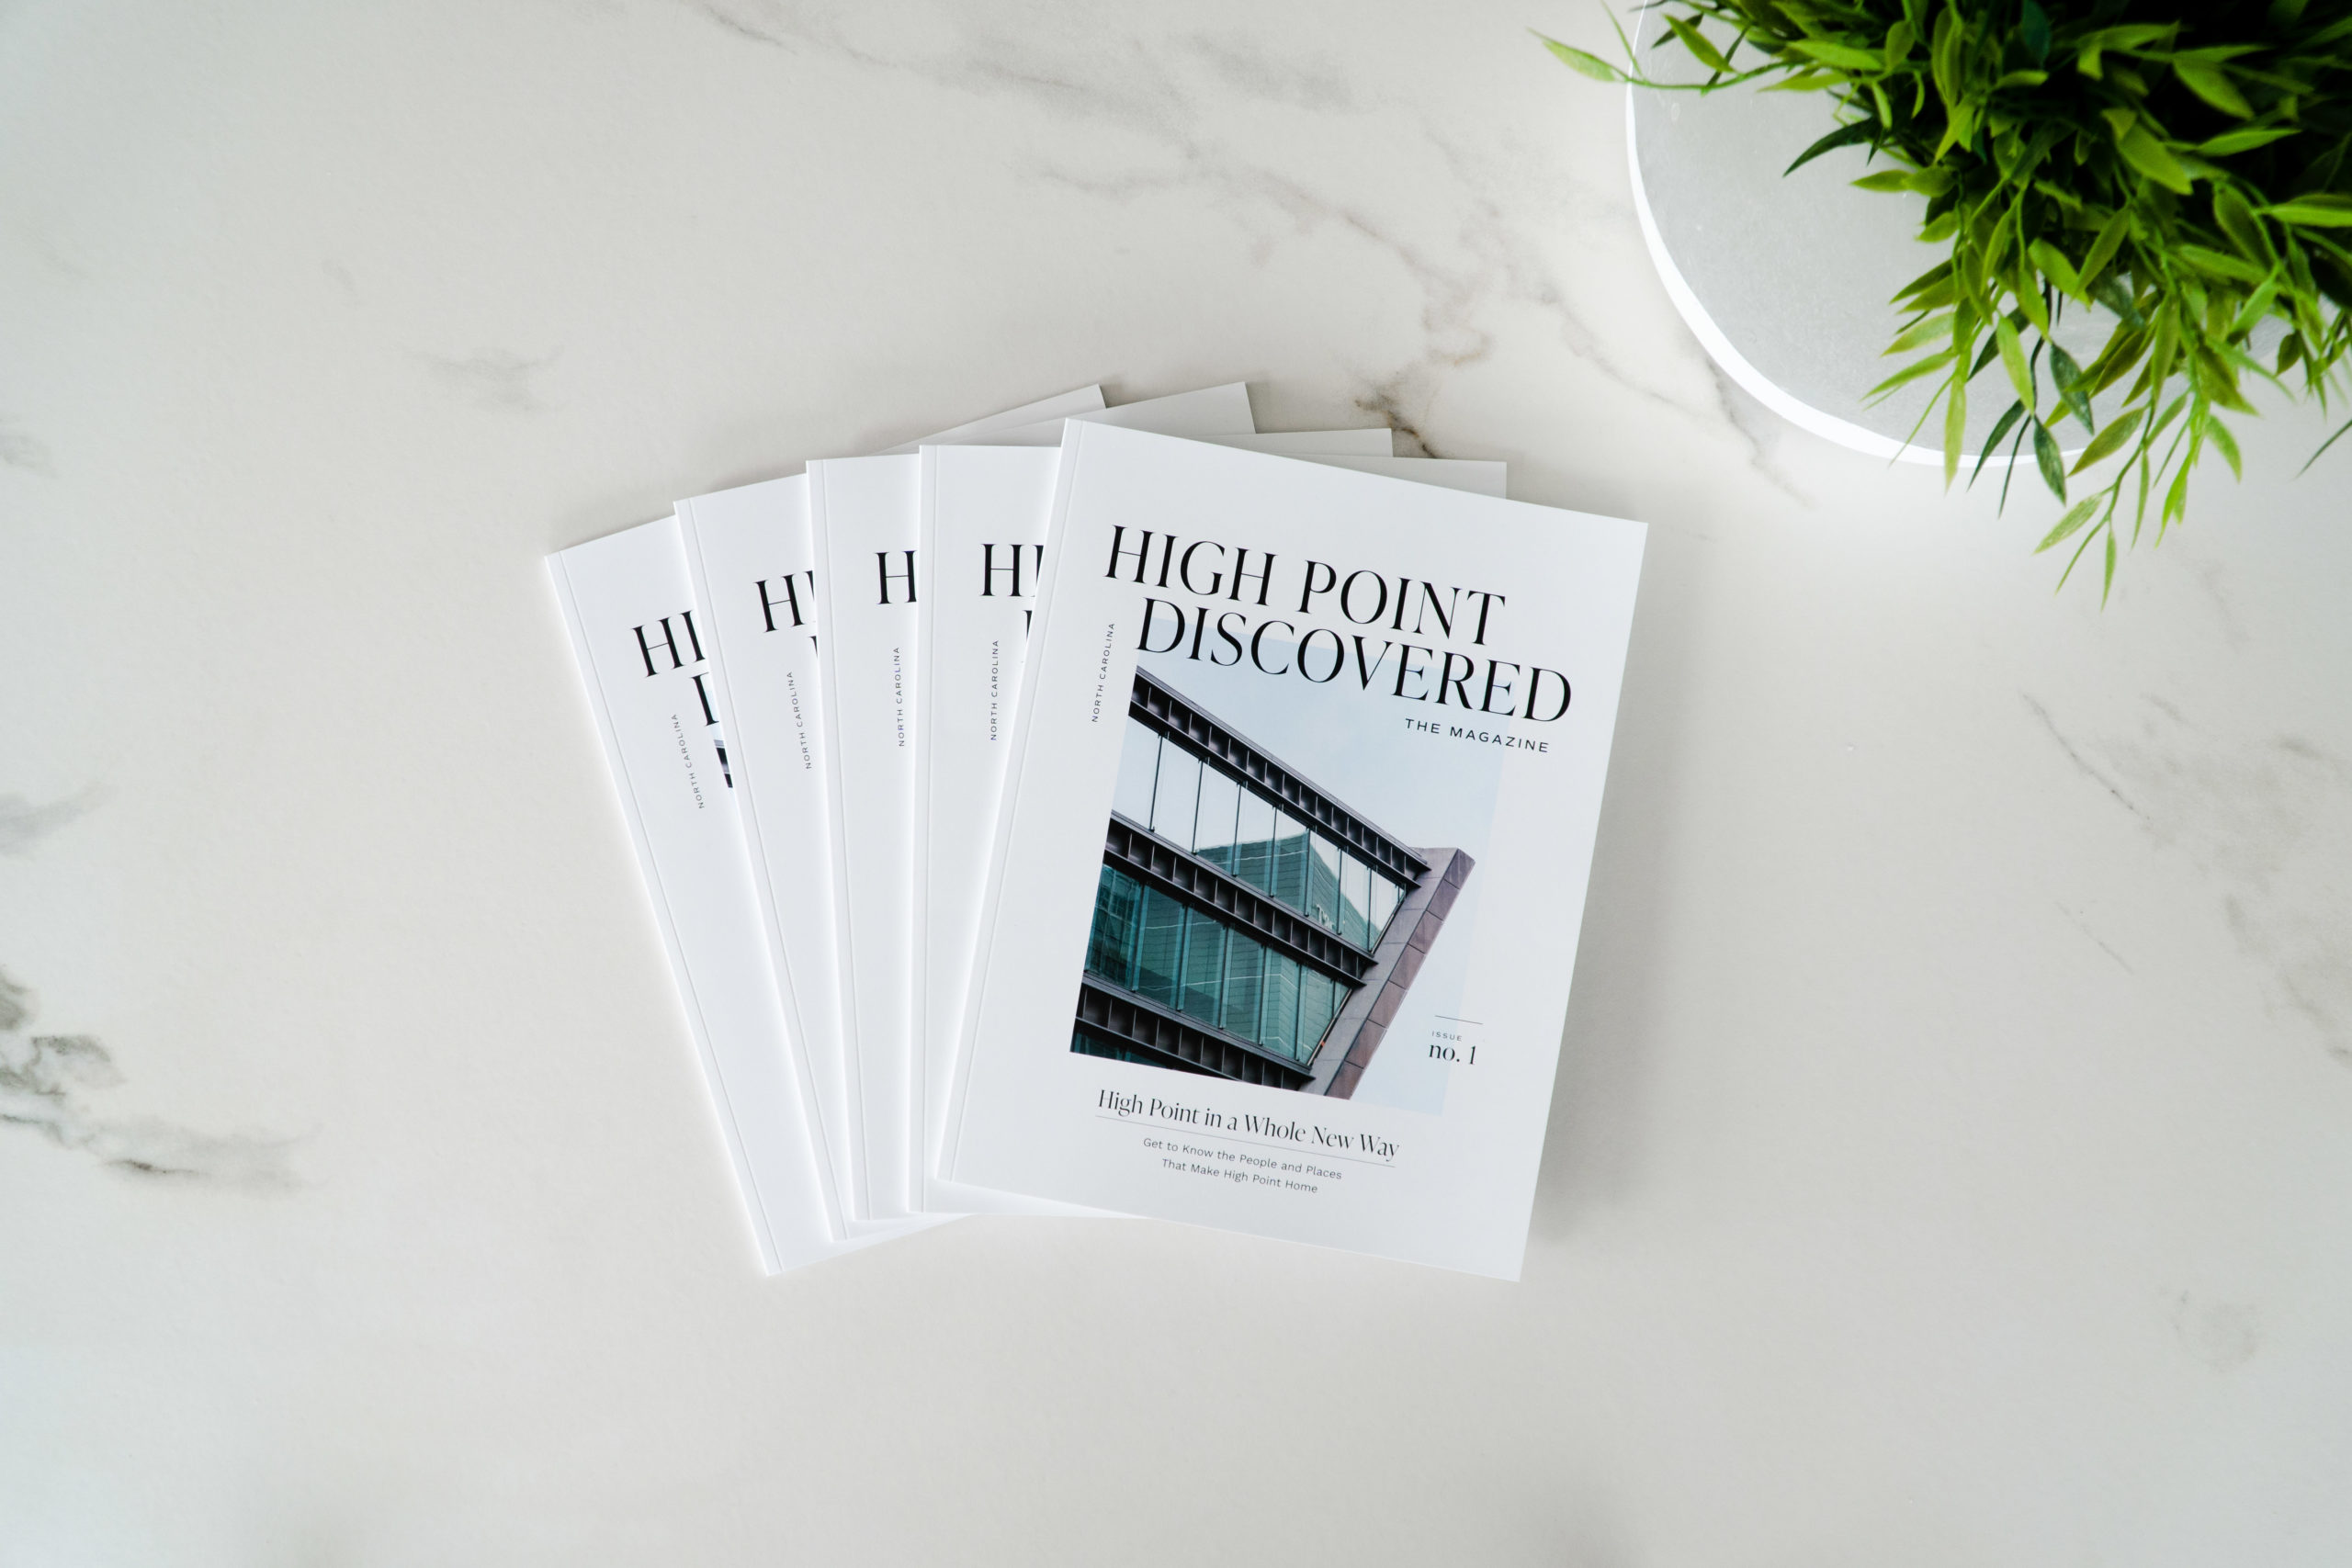 Several copies of High Point Discovered: The Magazine lay fanned on a table showcasing all that High Point, NC has to offer.